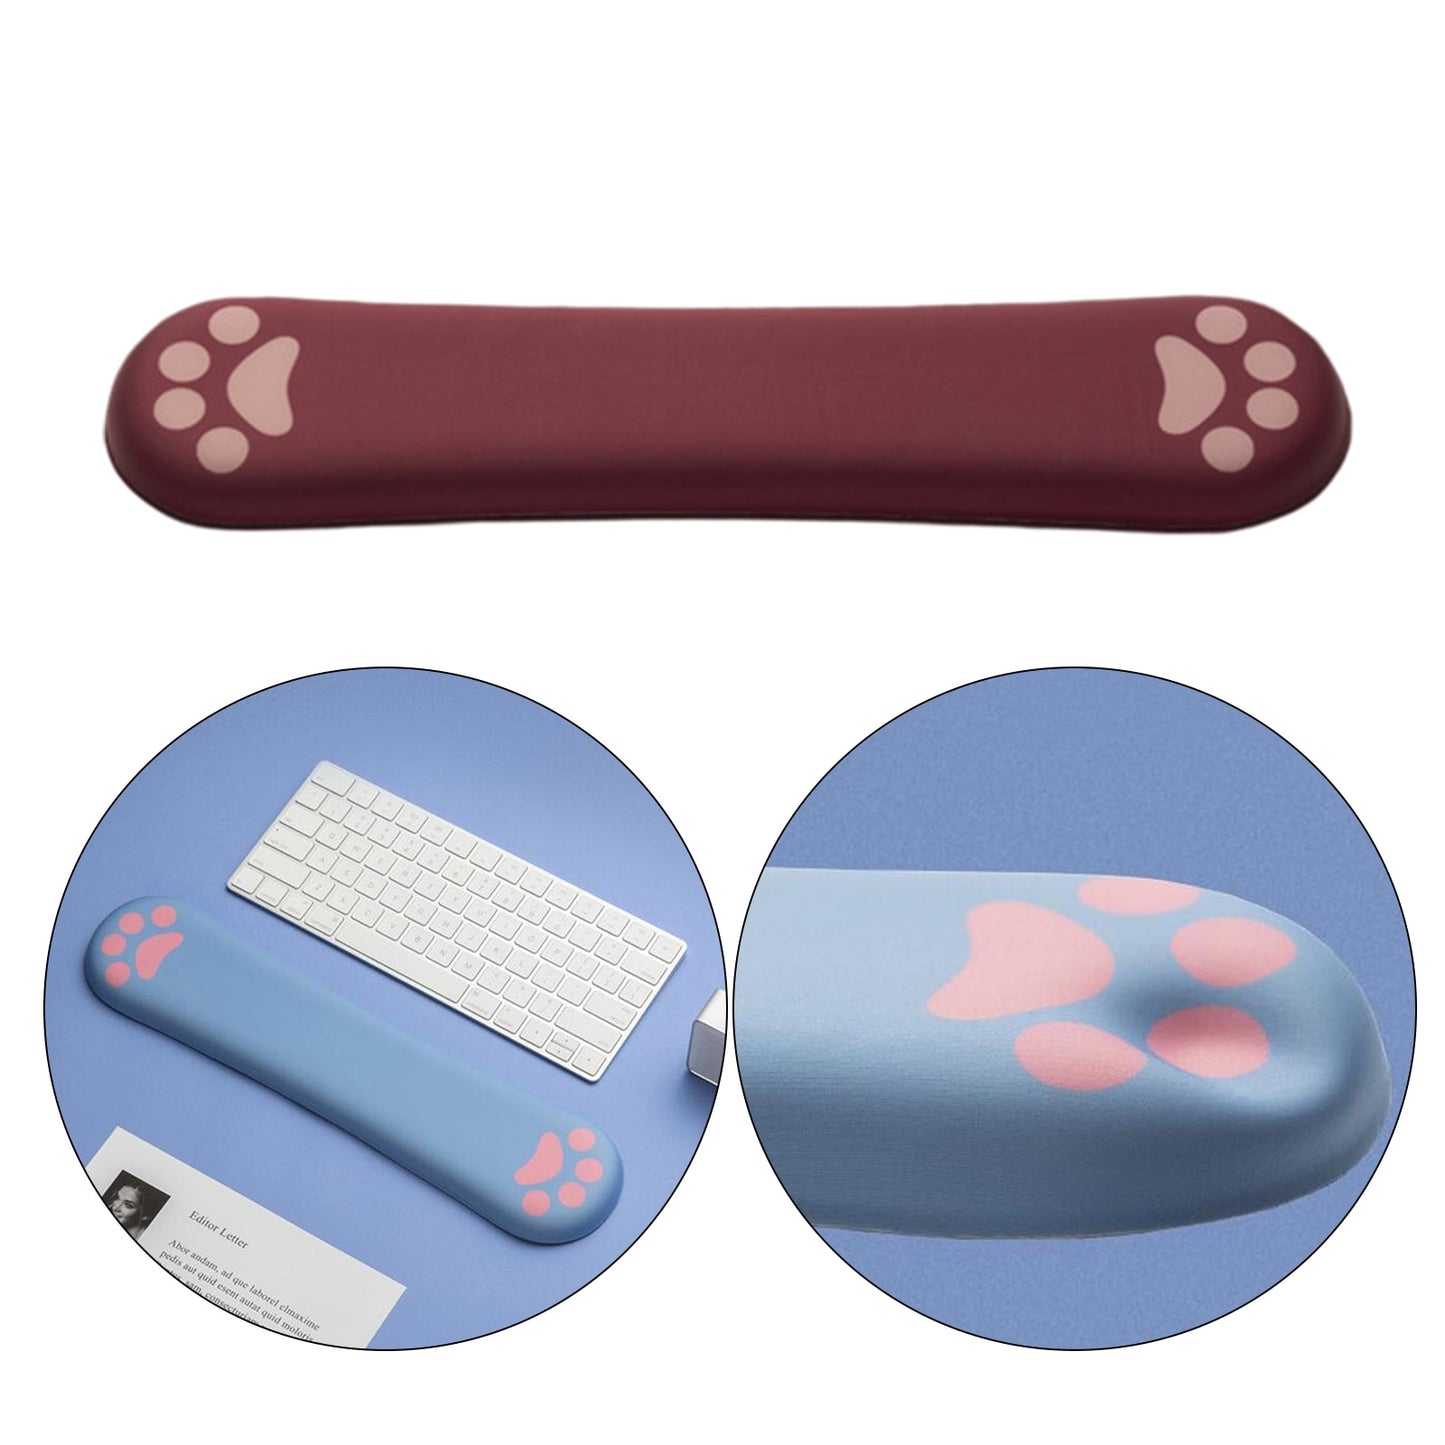 Memory Foam Nonslip  Keyboard Pad Wrist Support for Office Comfortable & Lightweight for Easy Typing Relieve Wrist Pain